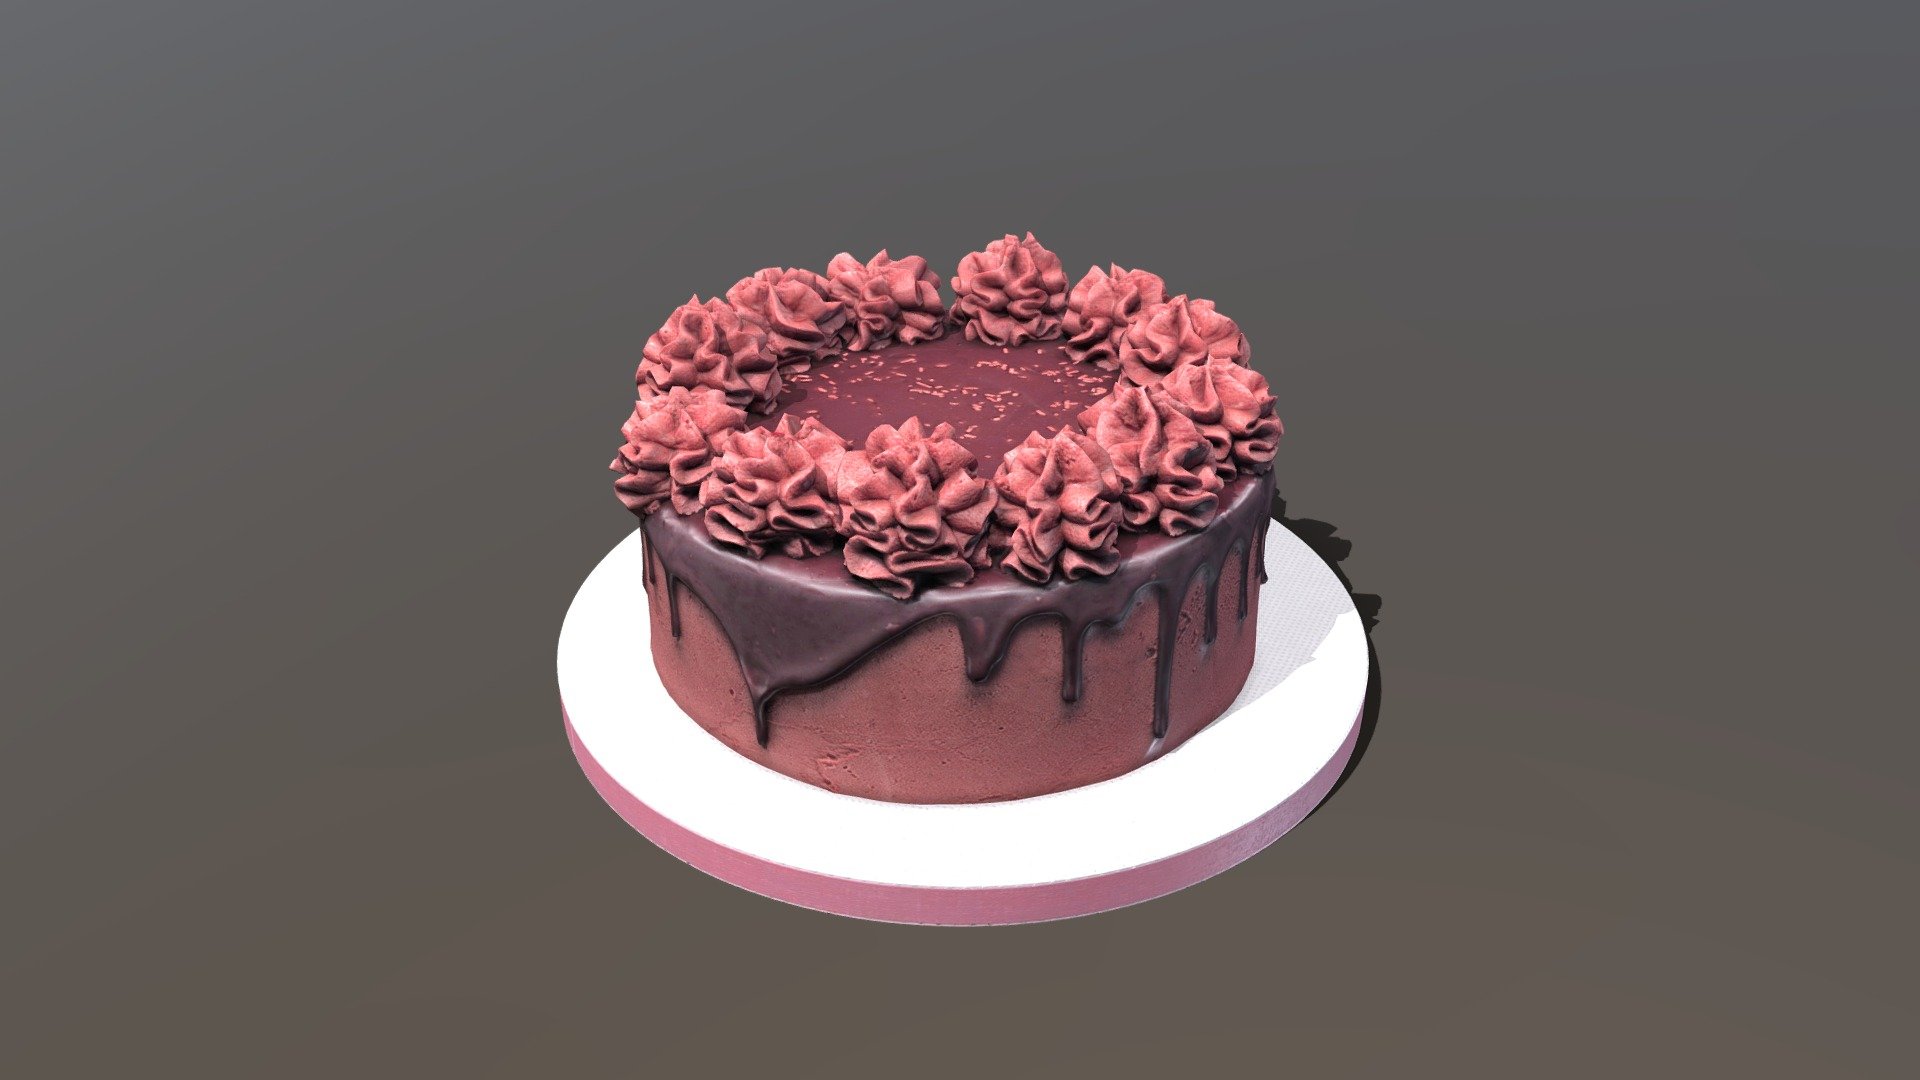 This premium Chocolate Gateau Cake model was created using photogrammetry which is made by CAKESBURG Premium Cake Shop in the UK. You can purchase real cake from this link: https://cakesburg.co.uk/products/chocolate-heaven-cake?_pos=1&amp;_sid=25d1b3fb8&amp;_ss=r

Textures 4096*4096px PBR photoscan-based materials Base Color, Normal, Roughness, Specular)

Click here for the cut &amp;amp; slice version.

Click here for a slice of cake model - Red Velvet Gateau - Buy Royalty Free 3D model by Cakesburg Premium 3D Cake Shop (@Viscom_Cakesburg) 3d model